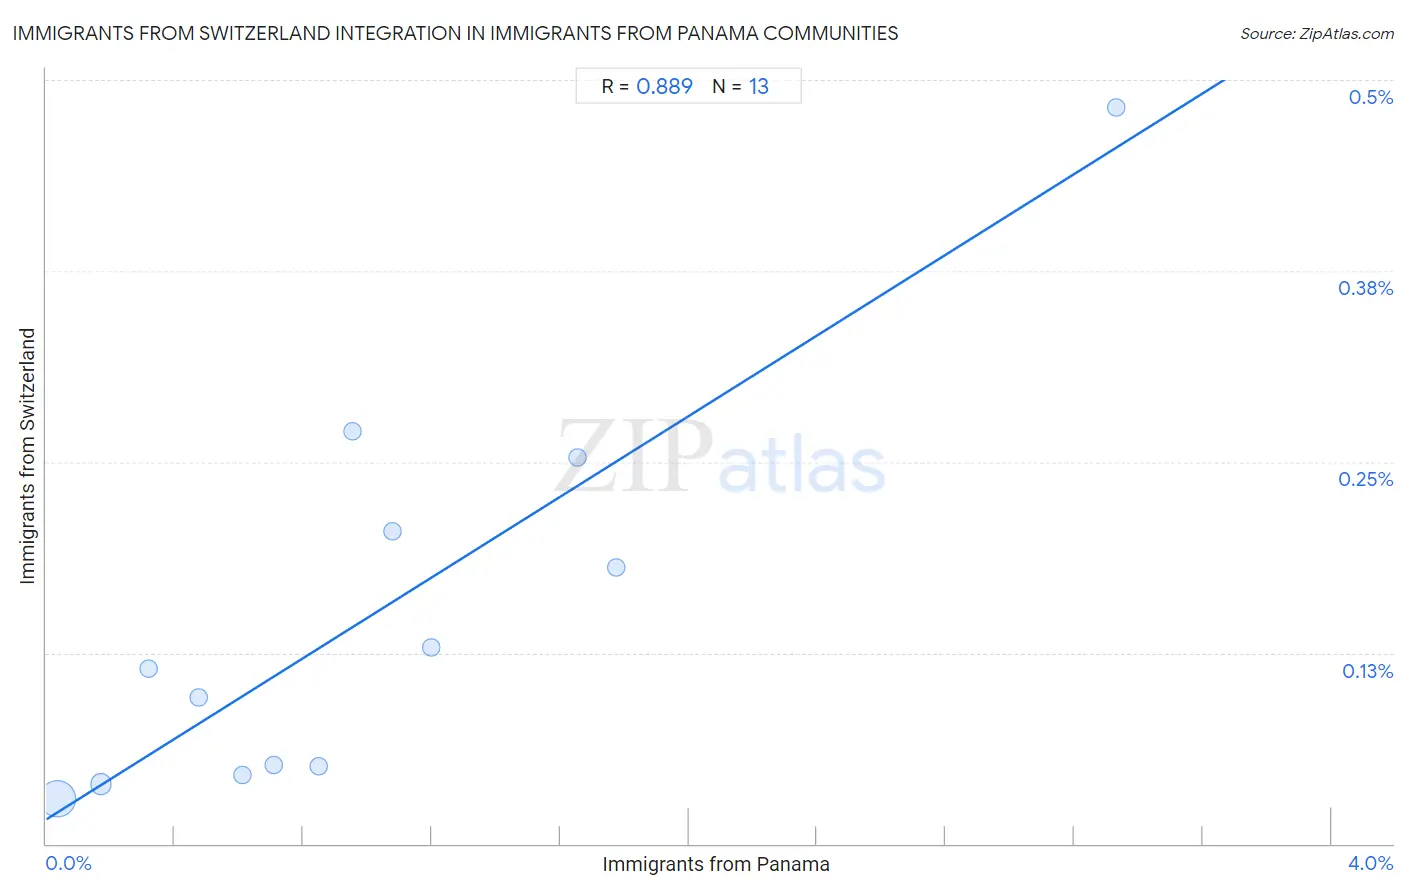 Immigrants from Panama Integration in Immigrants from Switzerland Communities